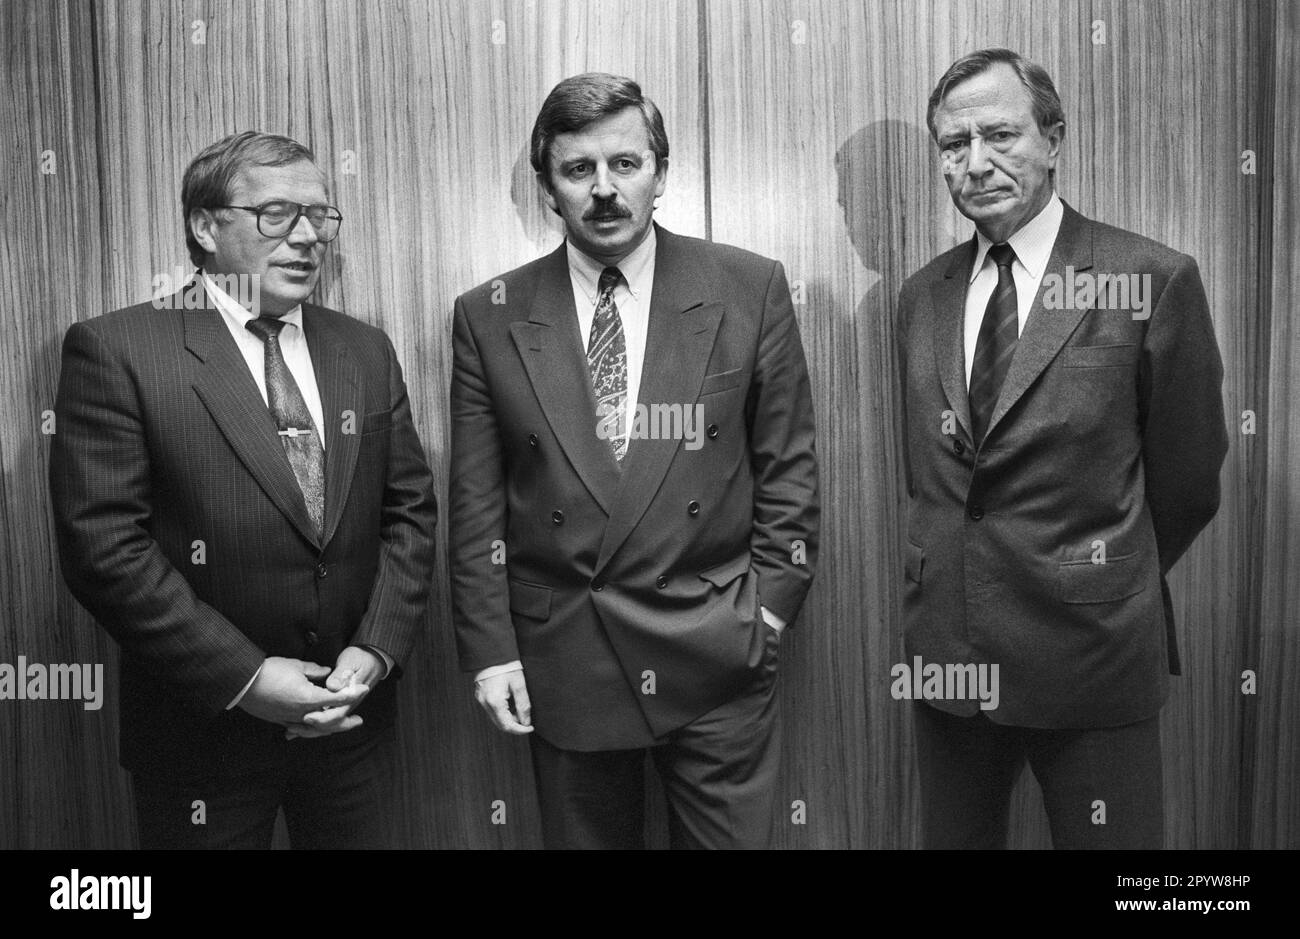 Germany, Bonn, October 2, 1991. archive: 28-80-22 Economic discussion on coal policy Photo: Federal Minister of Economics Juergen Moellemann, Hans Berger, Chairman of the Mining and Energy Trade Union (left) and Dr. Heinz Horn, Chairman of the Board of Ruhrkohle AG and Chairman of the Board of the German Coal Association [automated translation] Stock Photo